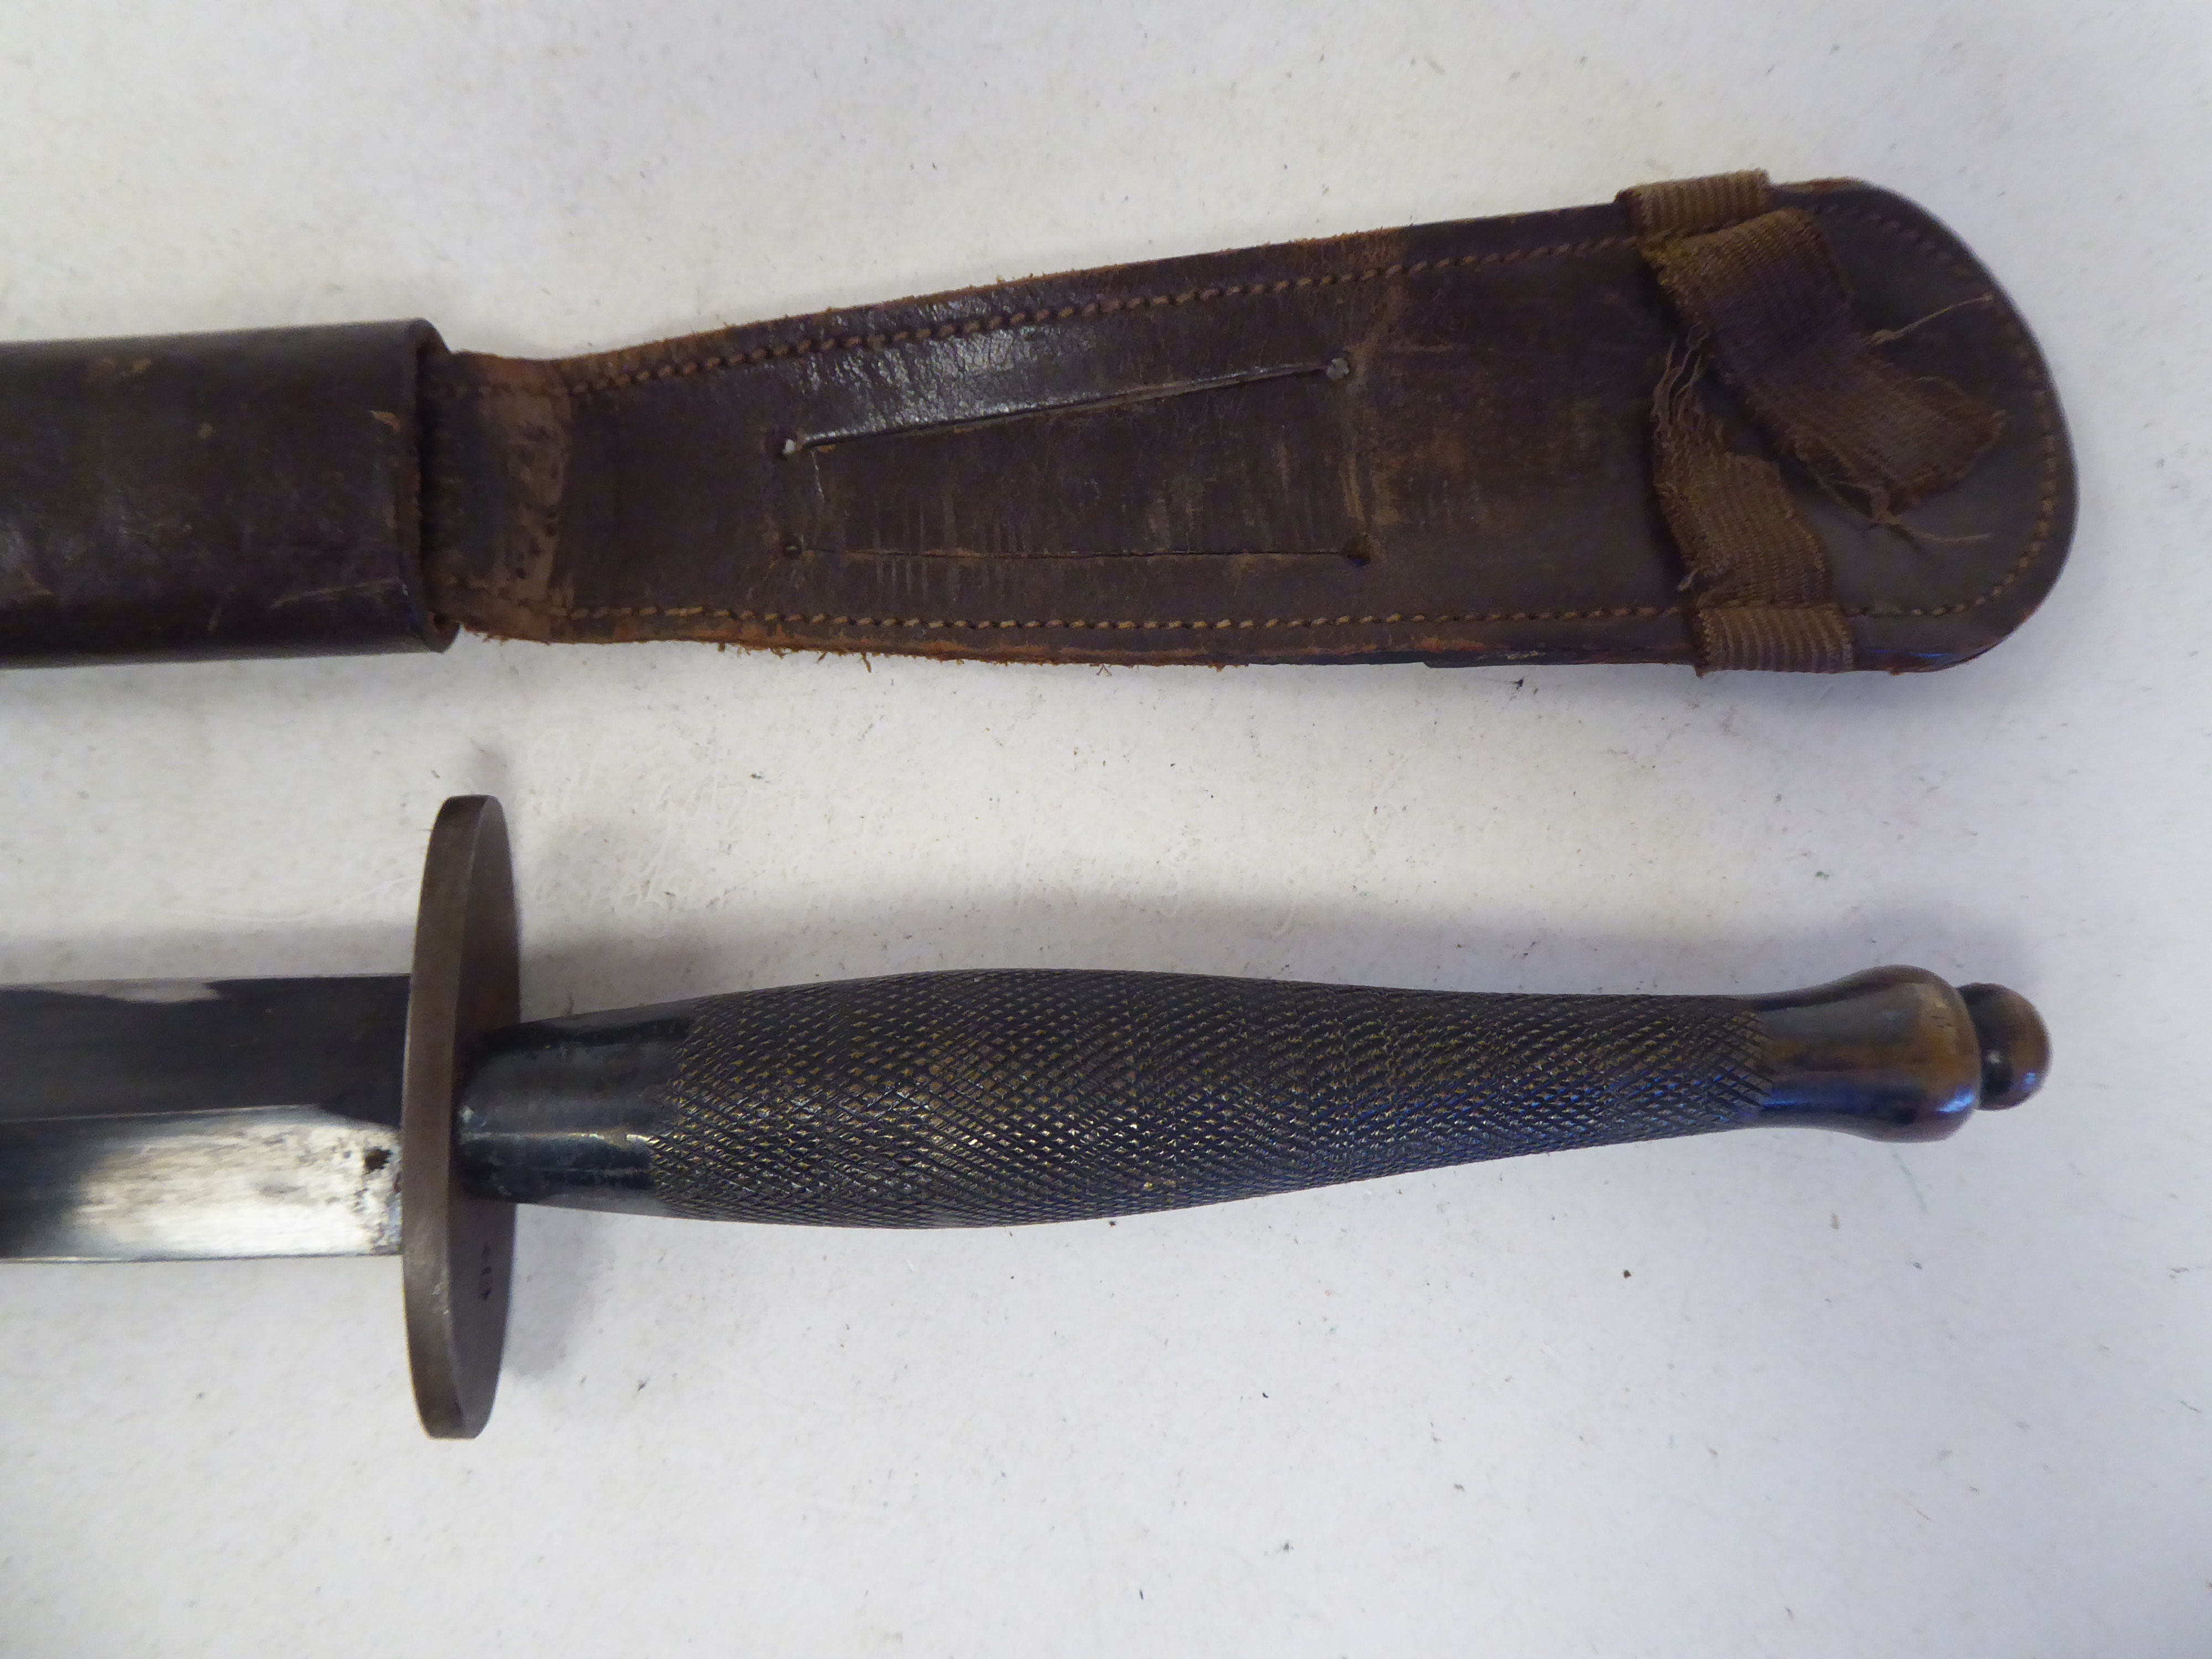 A World War II commando knife with a textured, elliptical handle, the blade 6.5"L in a moulded and - Image 2 of 4